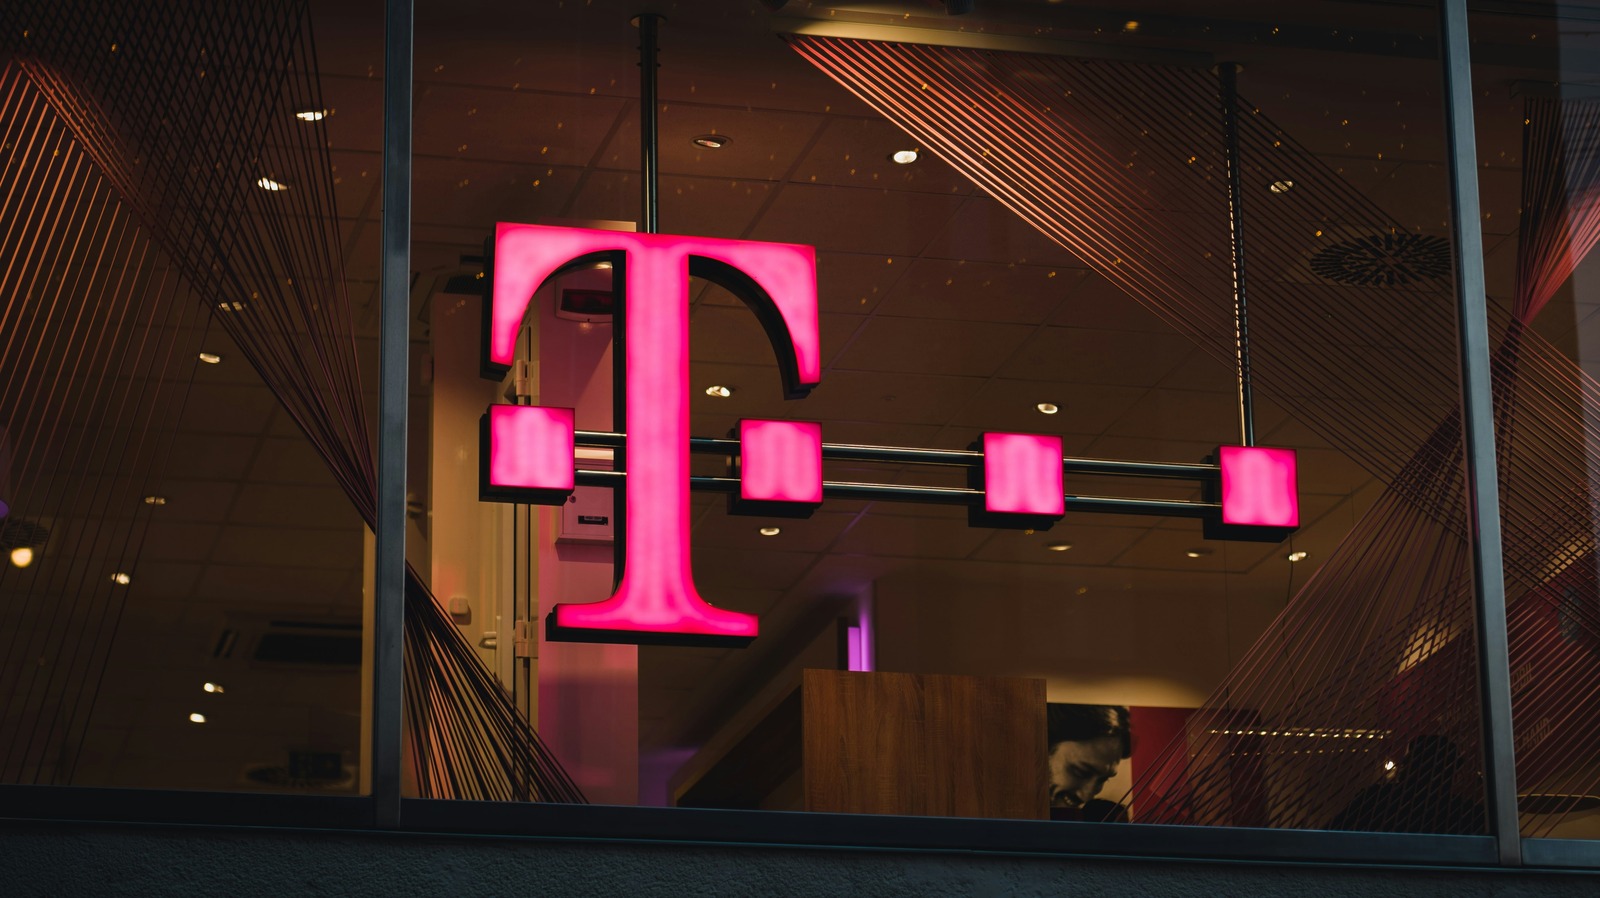 How Much Is T-Mobile's Cheapest Plan & What Features Does It Include?